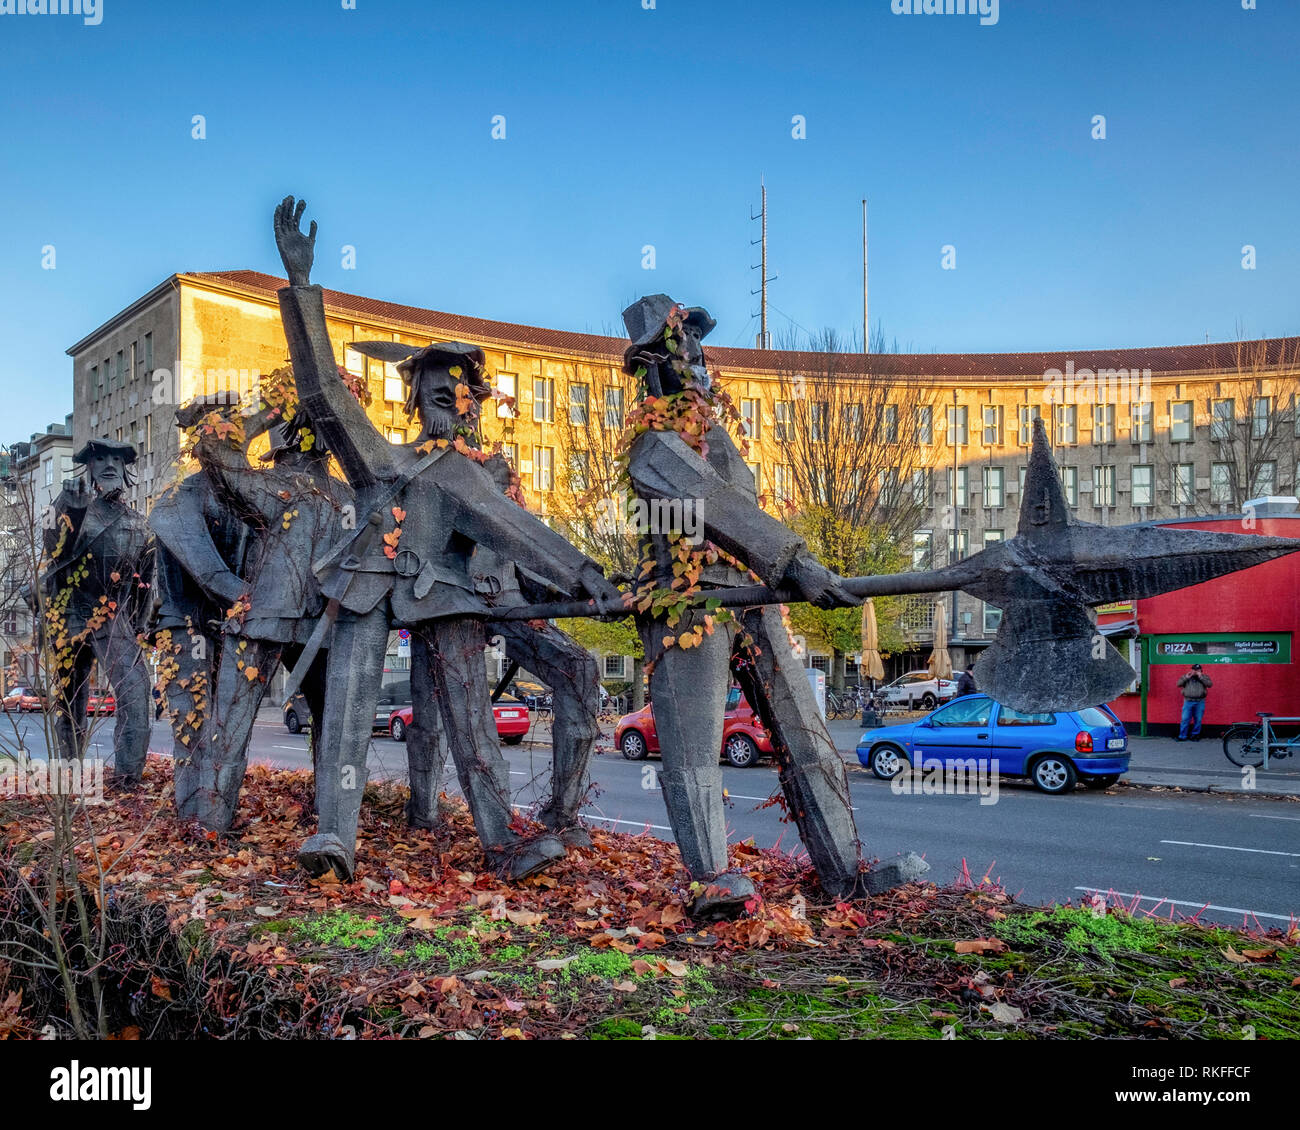 Berlin,Wilmersdorf, Fehrbelliner Platz. Sculpture, The Seven Swabians by sculptor Hans Georg Damm based on a fairy tale by the Brothers Grimm Stock Photo